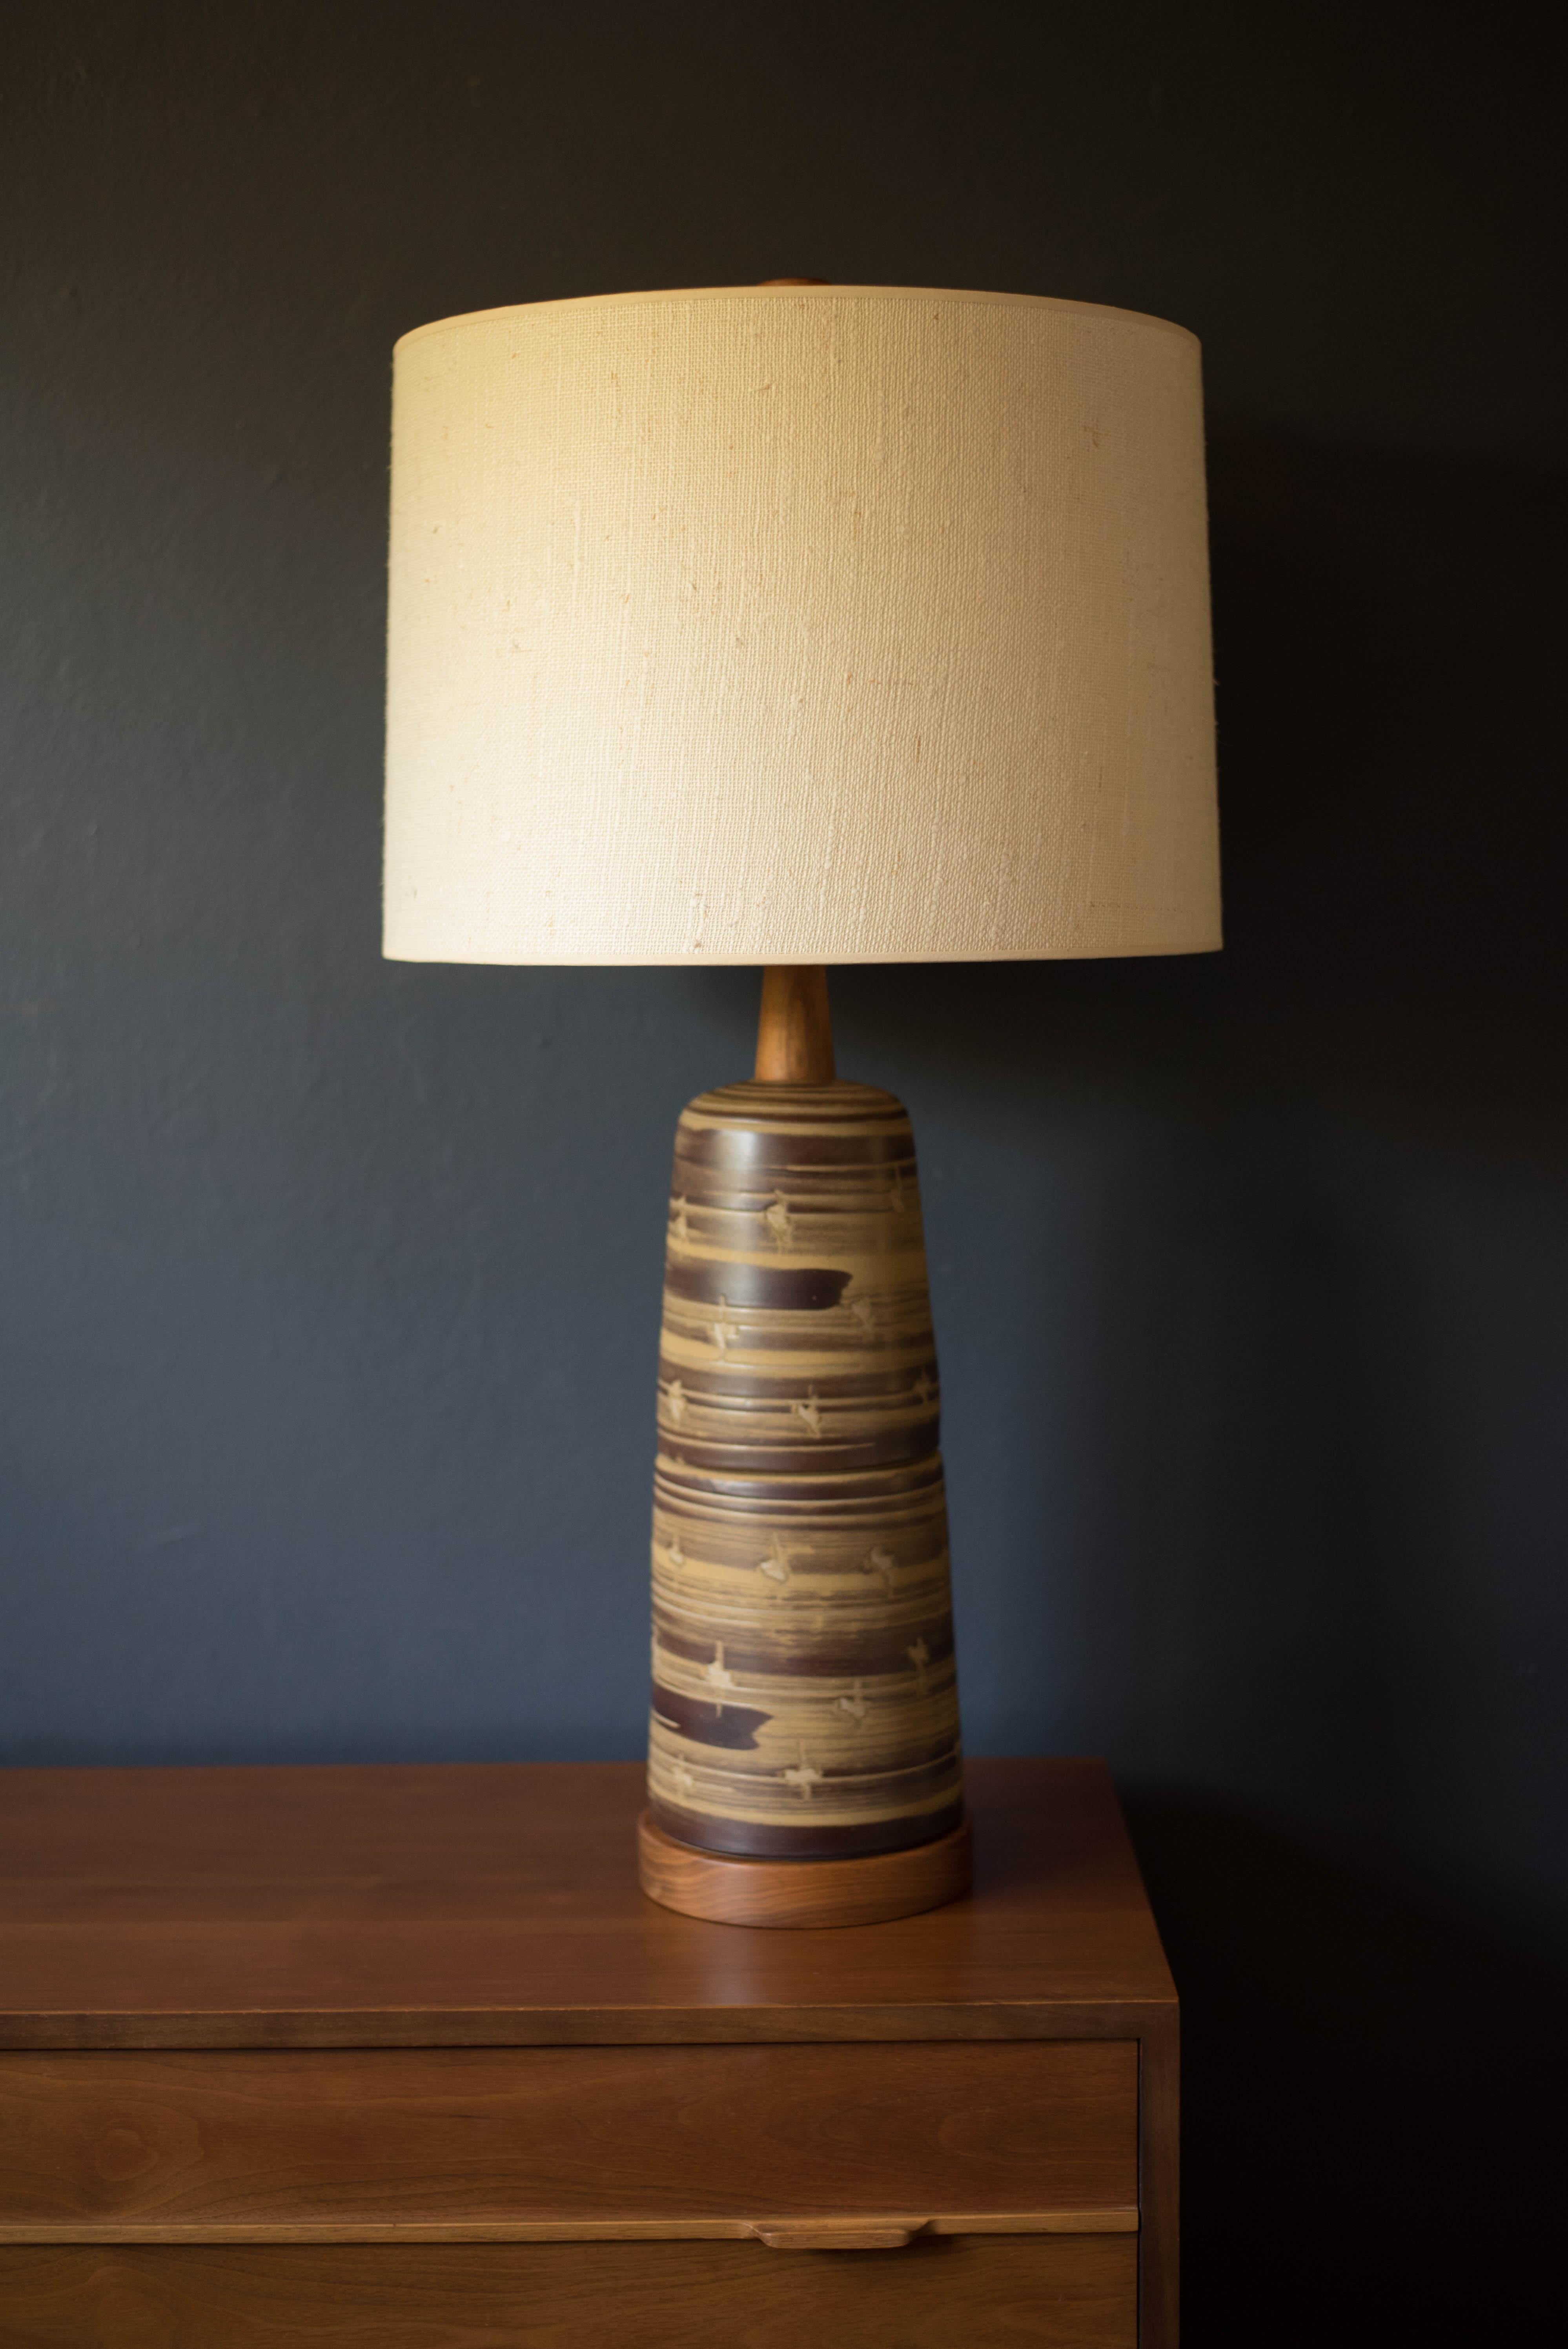 Vintage stoneware ceramic pottery lamp designed by Gordon and Jane Martz for Marshall Studios Inc., Veedersburg, Indiana. This piece features a matte tan and dark brown brushed glaze with decorative incising. This piece is handthrown with two